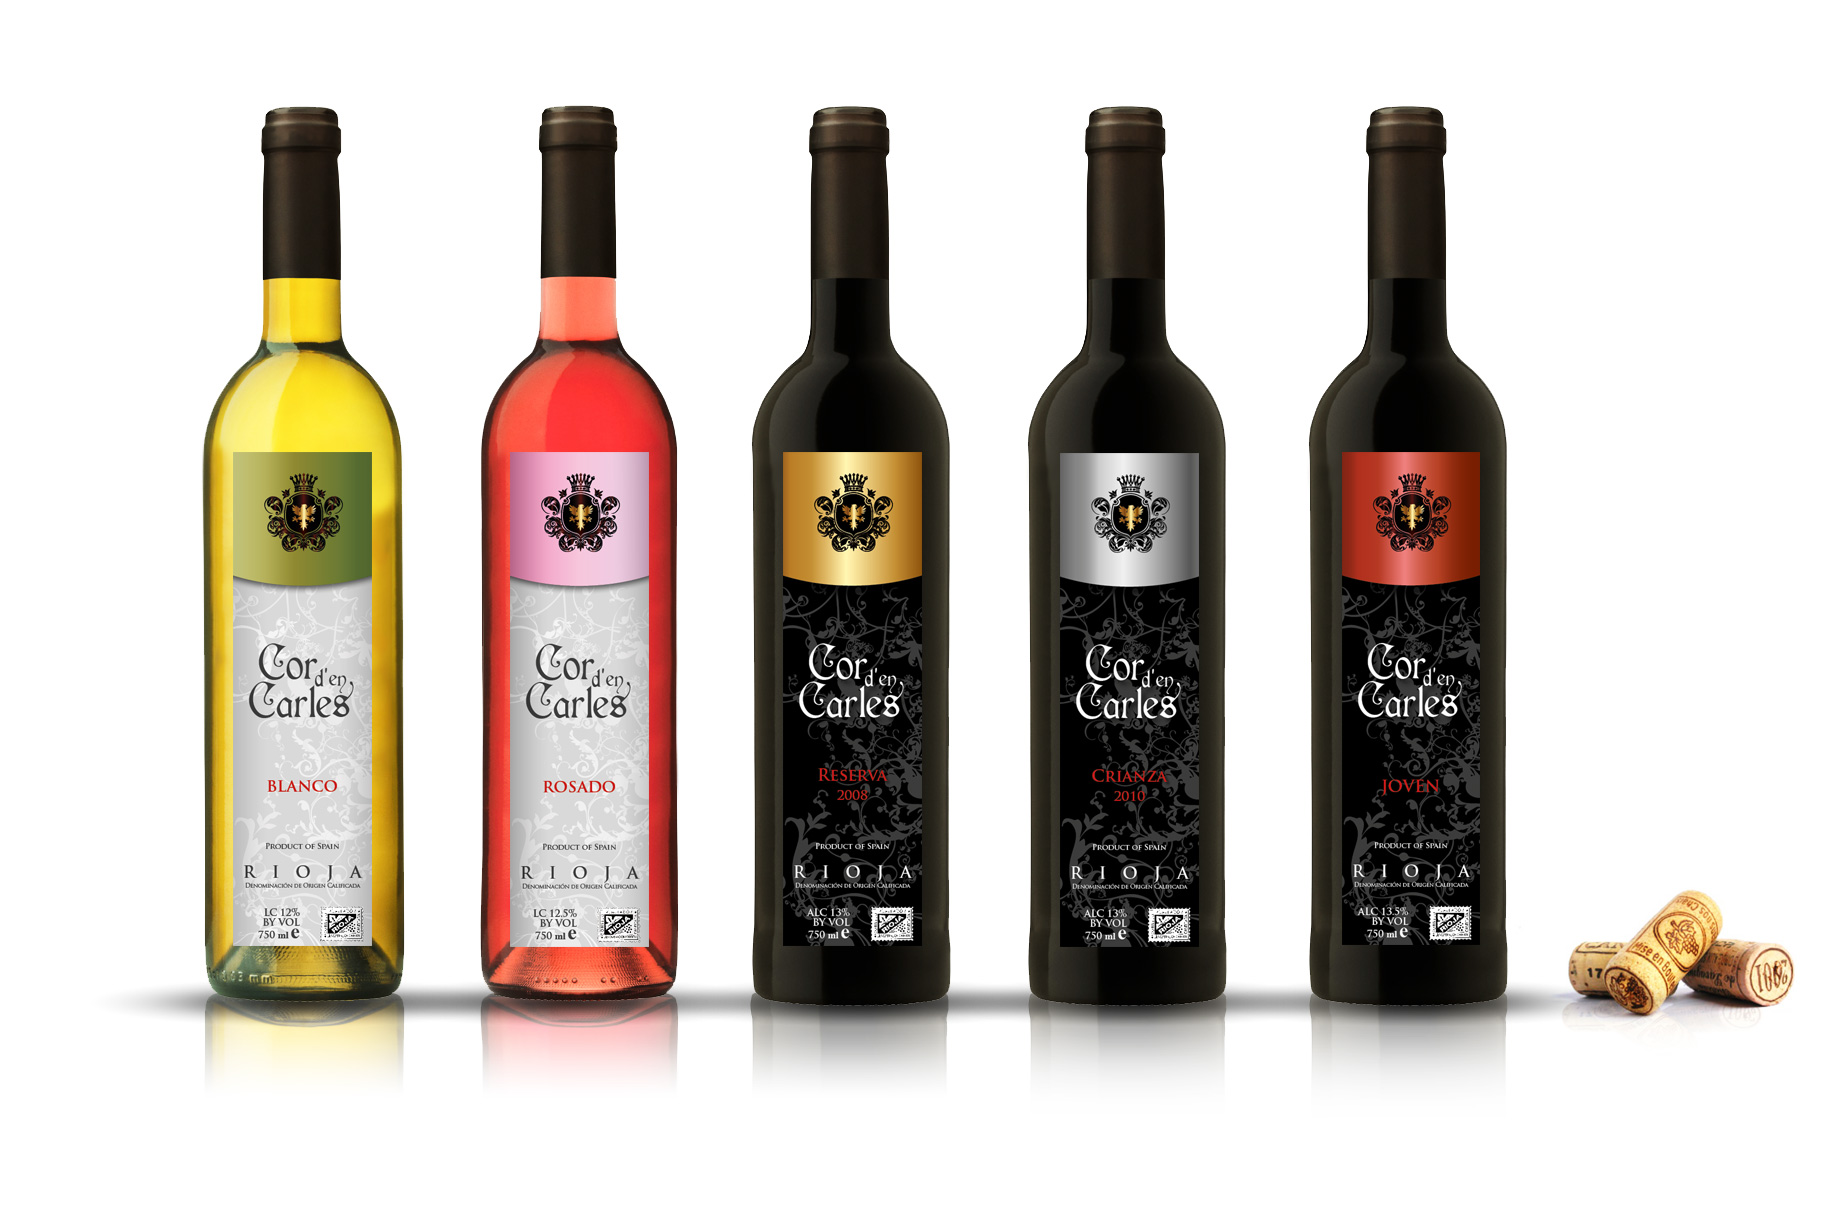 Portfolio of graphic and creative design works classic wine labels and packaging for Spanish wine COR D'EN CARLES for export to China